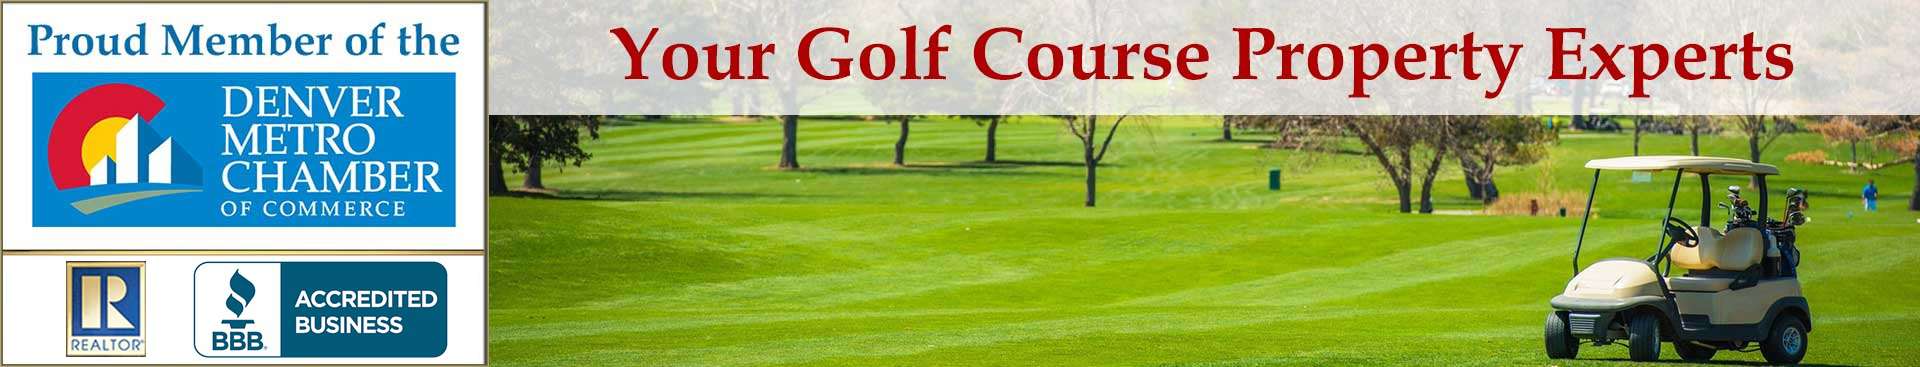 Golf-Course-Home-Banner-New